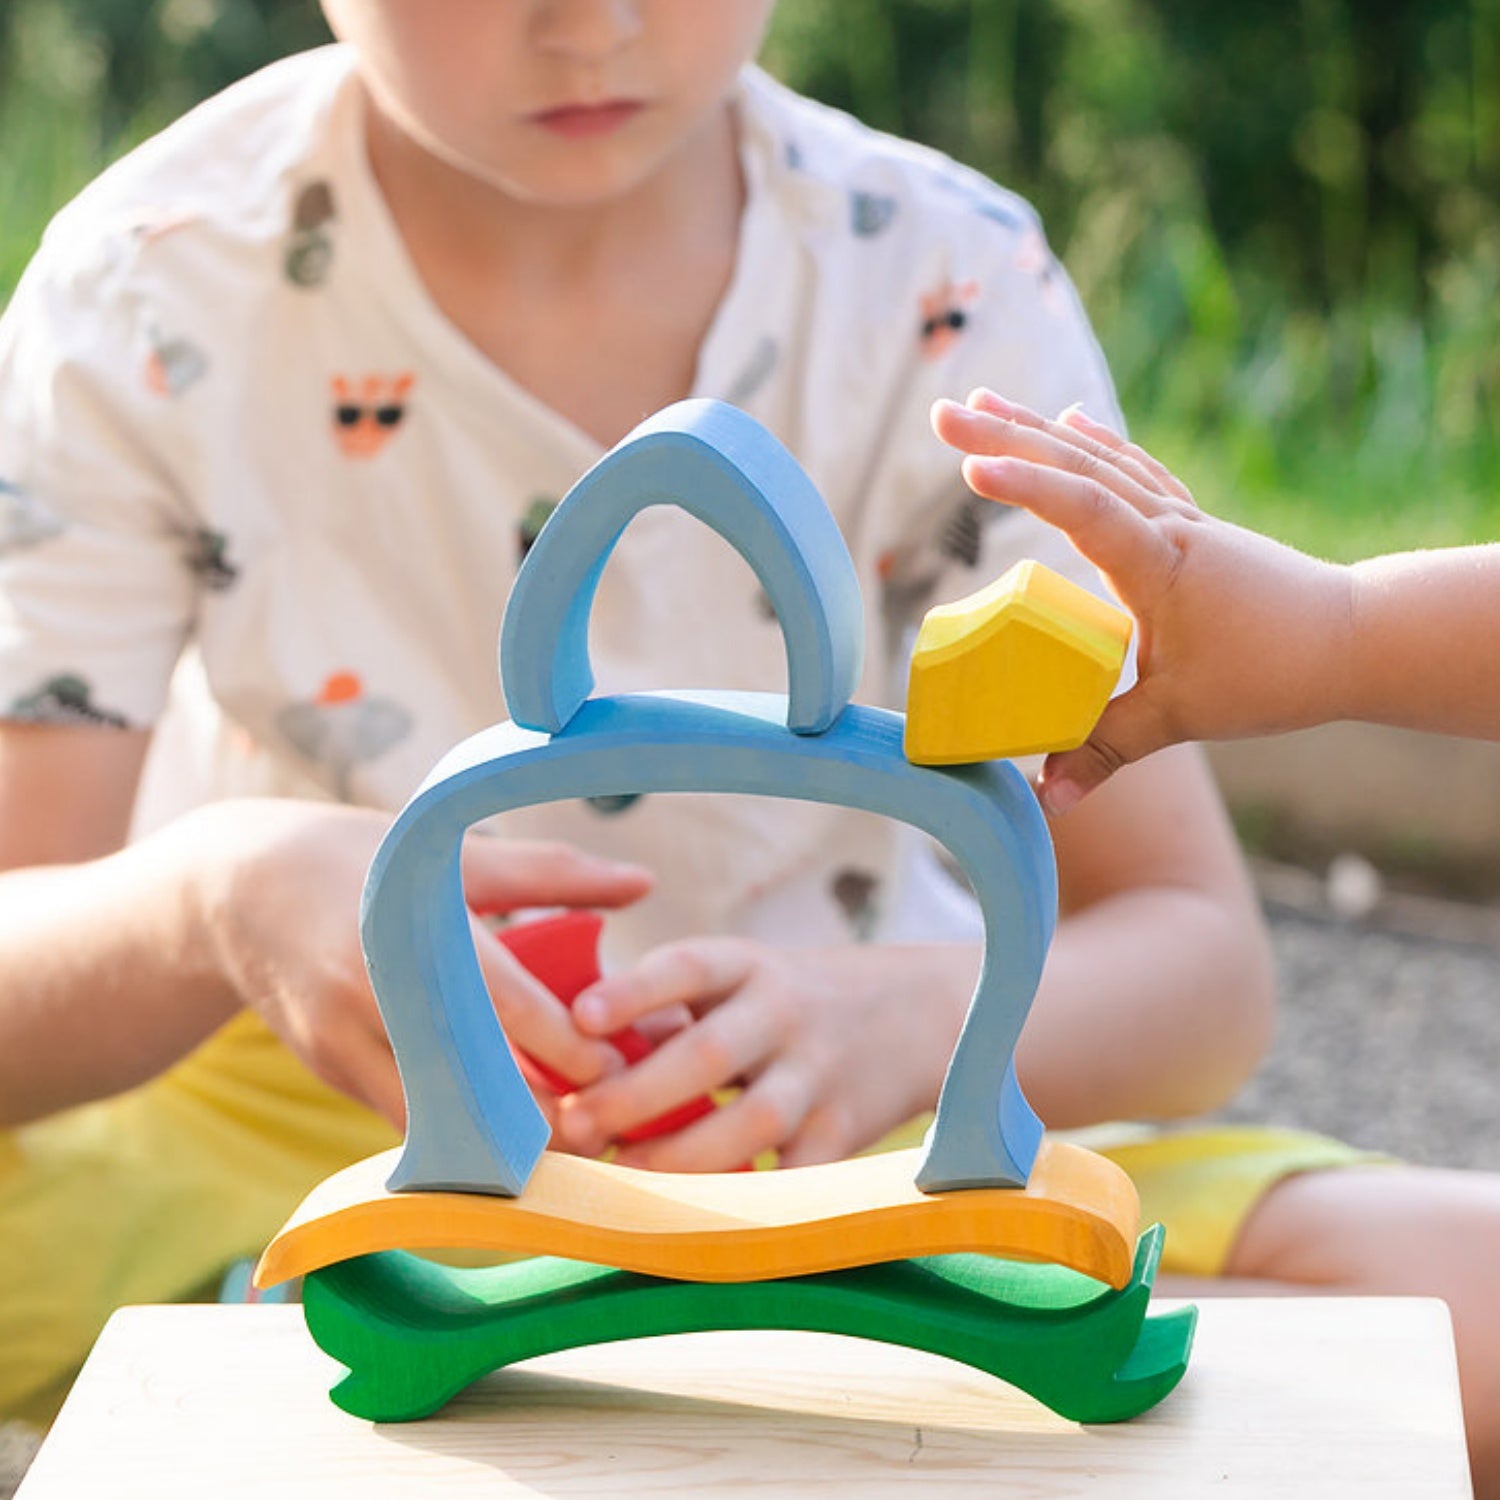 Gluckskafer Wooden Mushroom House | Imaginative Play Wooden Toys | Waldorf Education and Montessori Education | Lifestyle: Children Playing with Pieces | BeoVERDE.ie